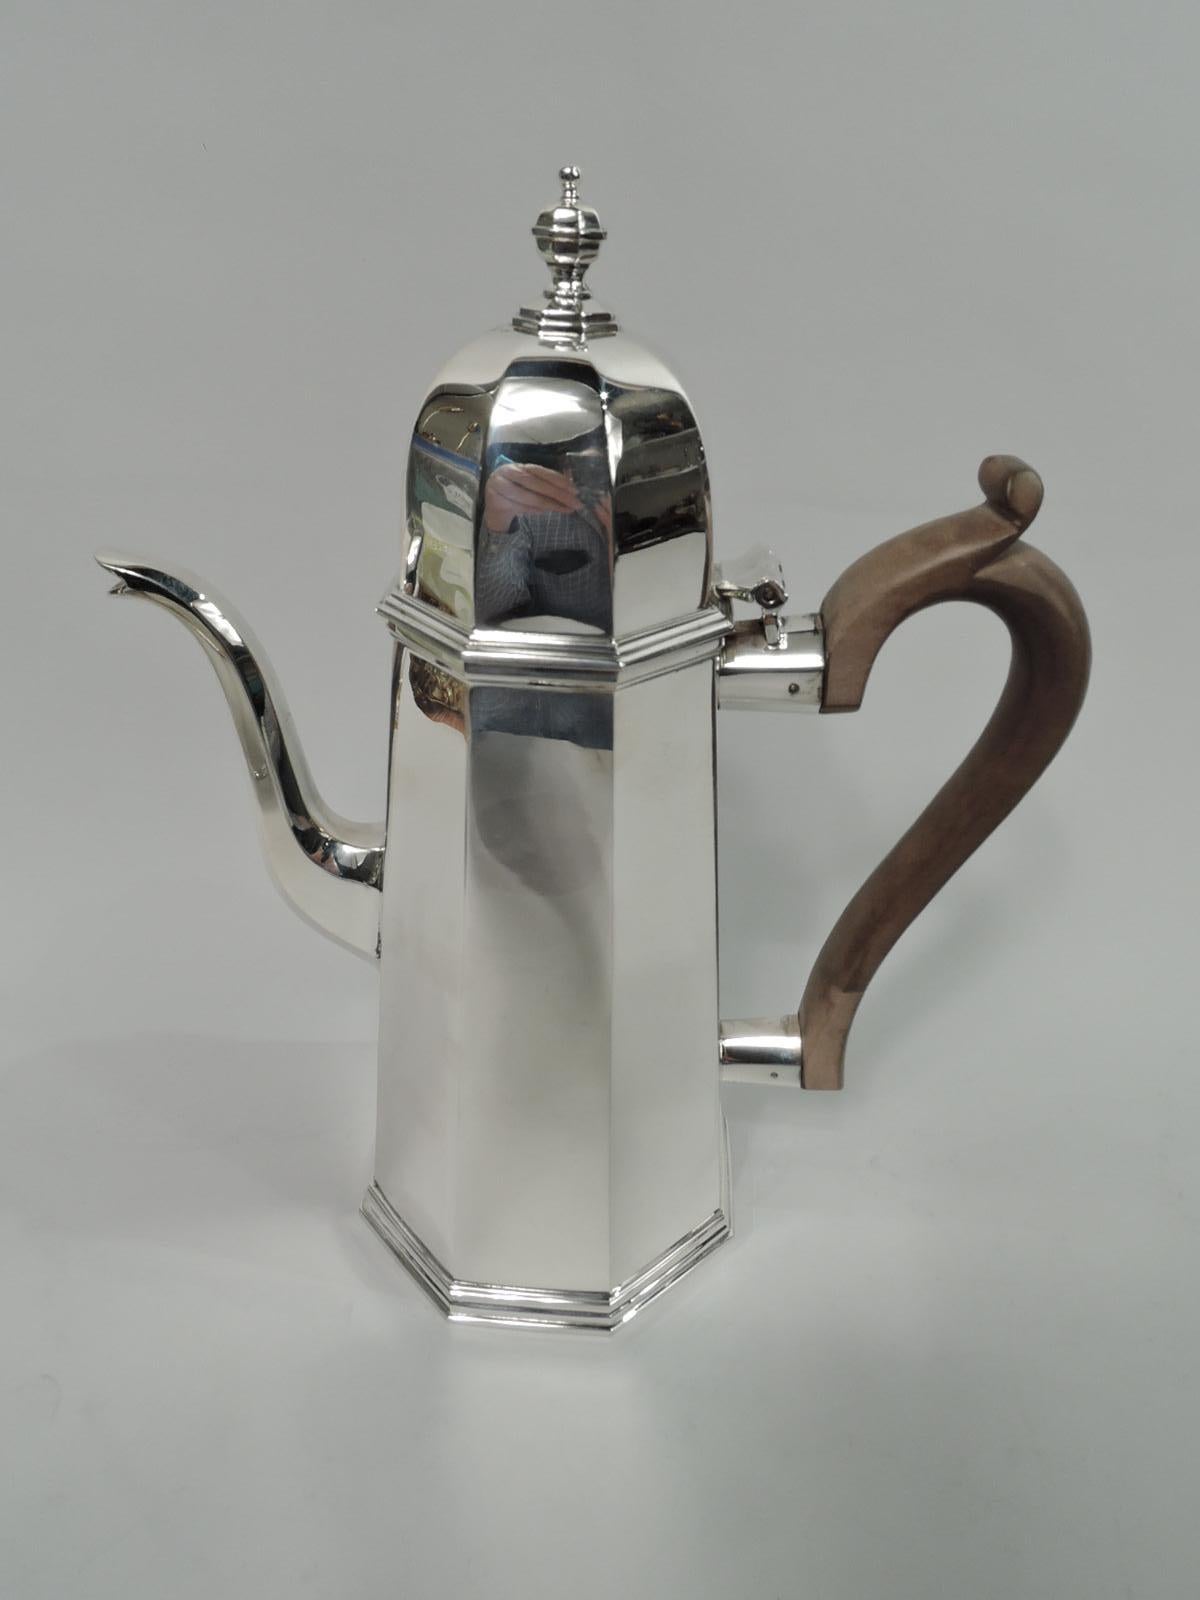 English Georgian sterling silver coffeepot and creamer, 1987. Coffeepot: Faceted octagonal body with upward and tapering sides, hinged and dome finial with vasiform finial, s-spout, and stained-wood capped scroll handle. Creamer: Faceted baluster on